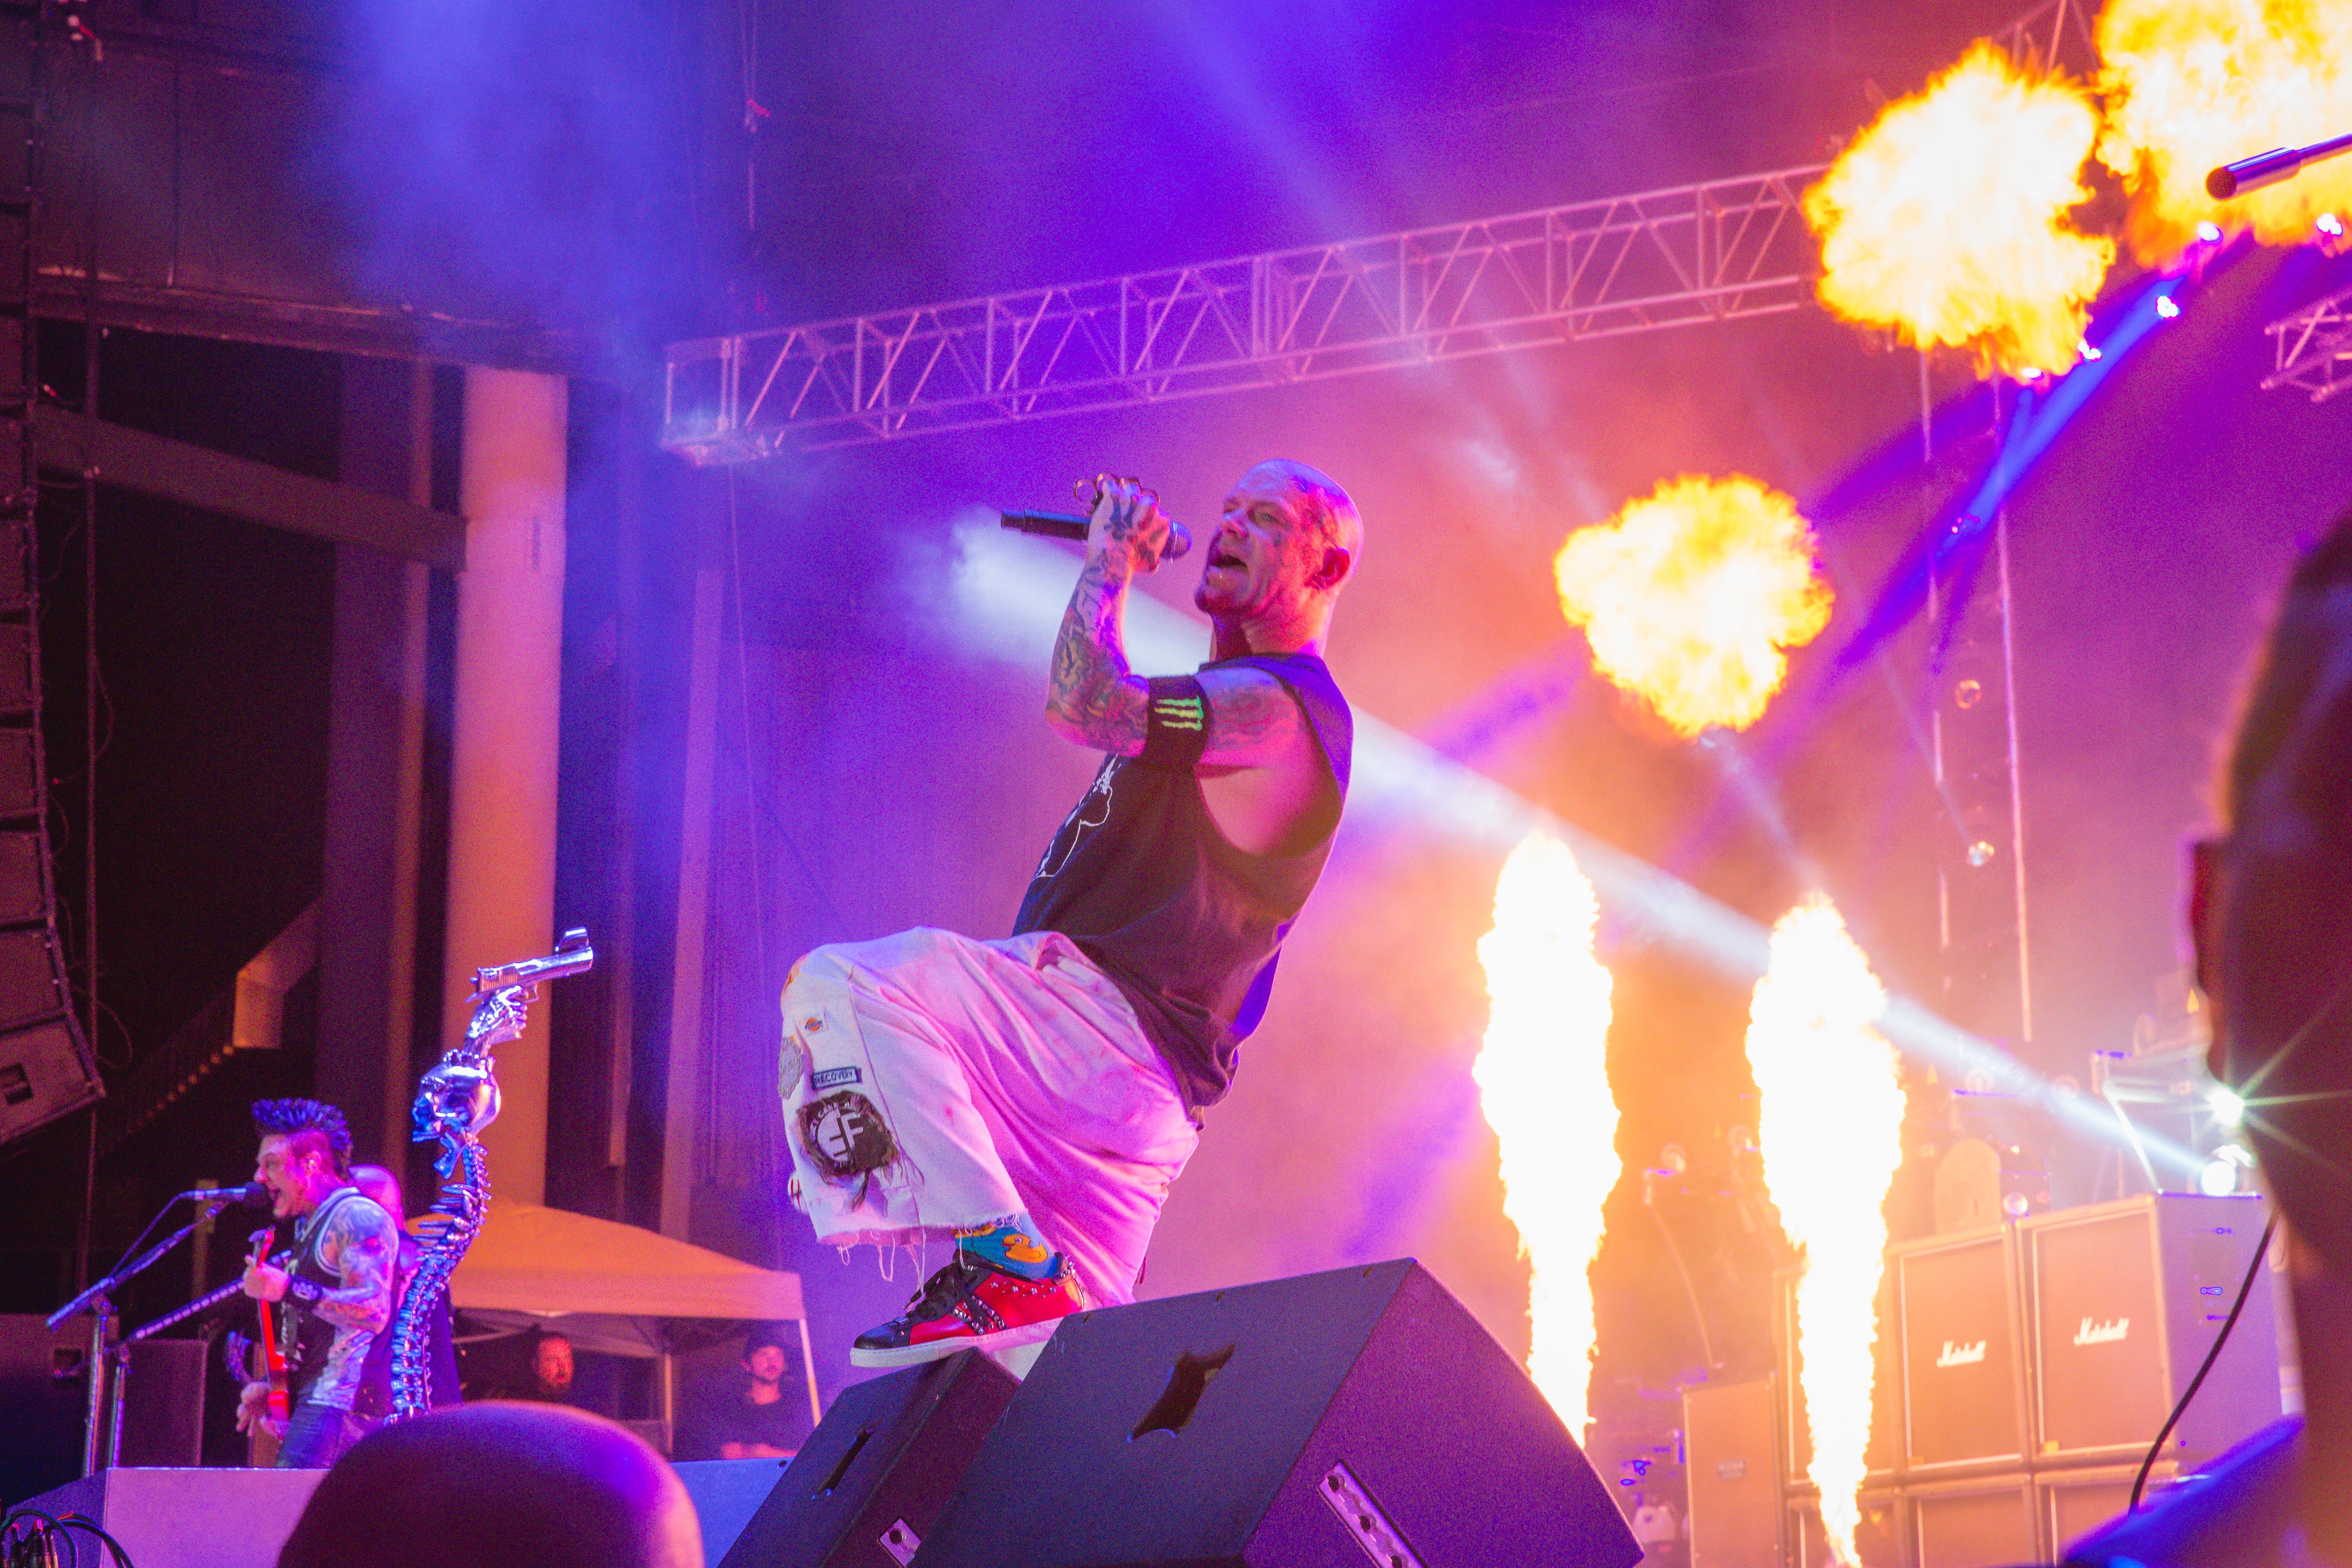 Five Finger Death Punch, In This Moment bring metal show to Ozarks Amphitheater